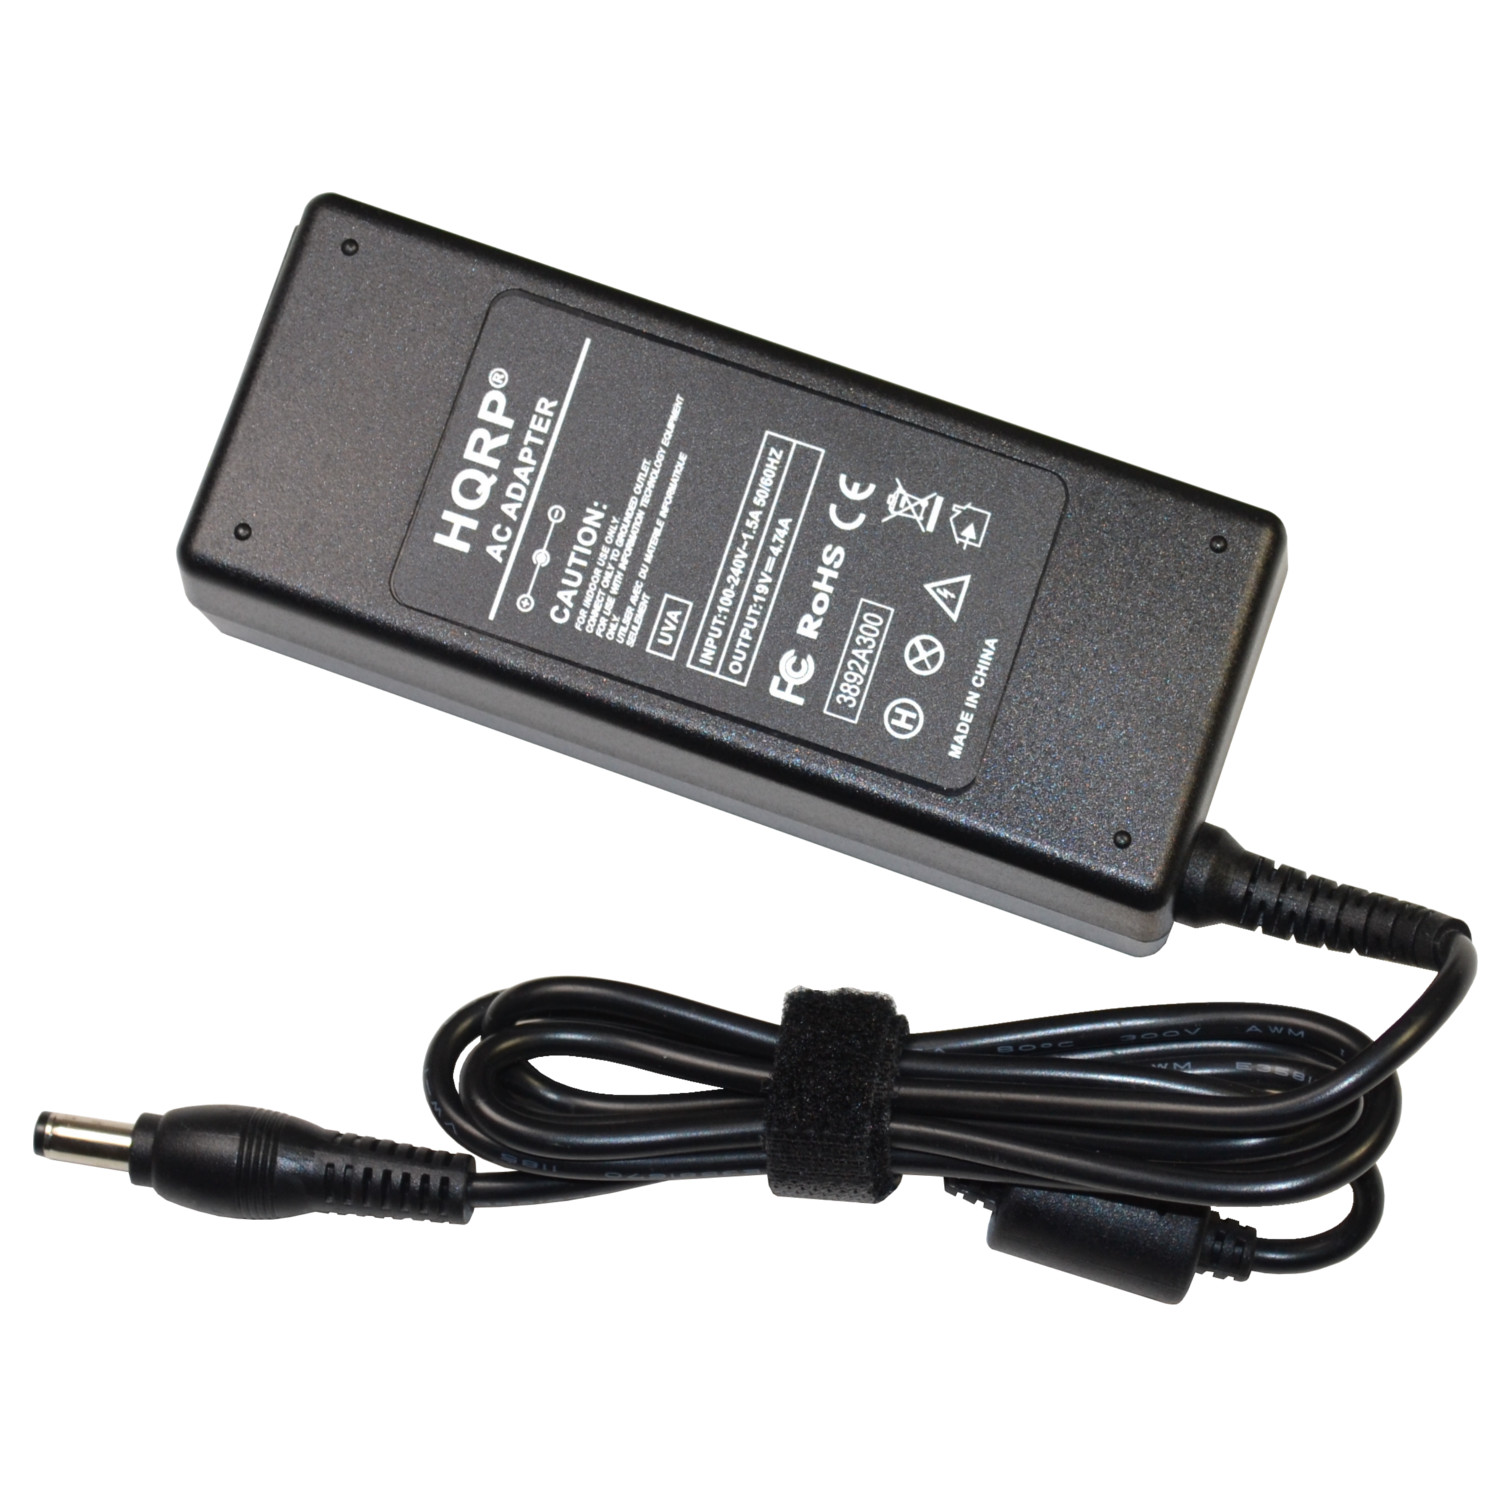 HQRP AC Adapter for Westinghouse LD-2655VX LD-2657DF LD-2680 LD-2685VX LED LCD HDTV TV Power Supply Cord Westing house - image 3 of 7